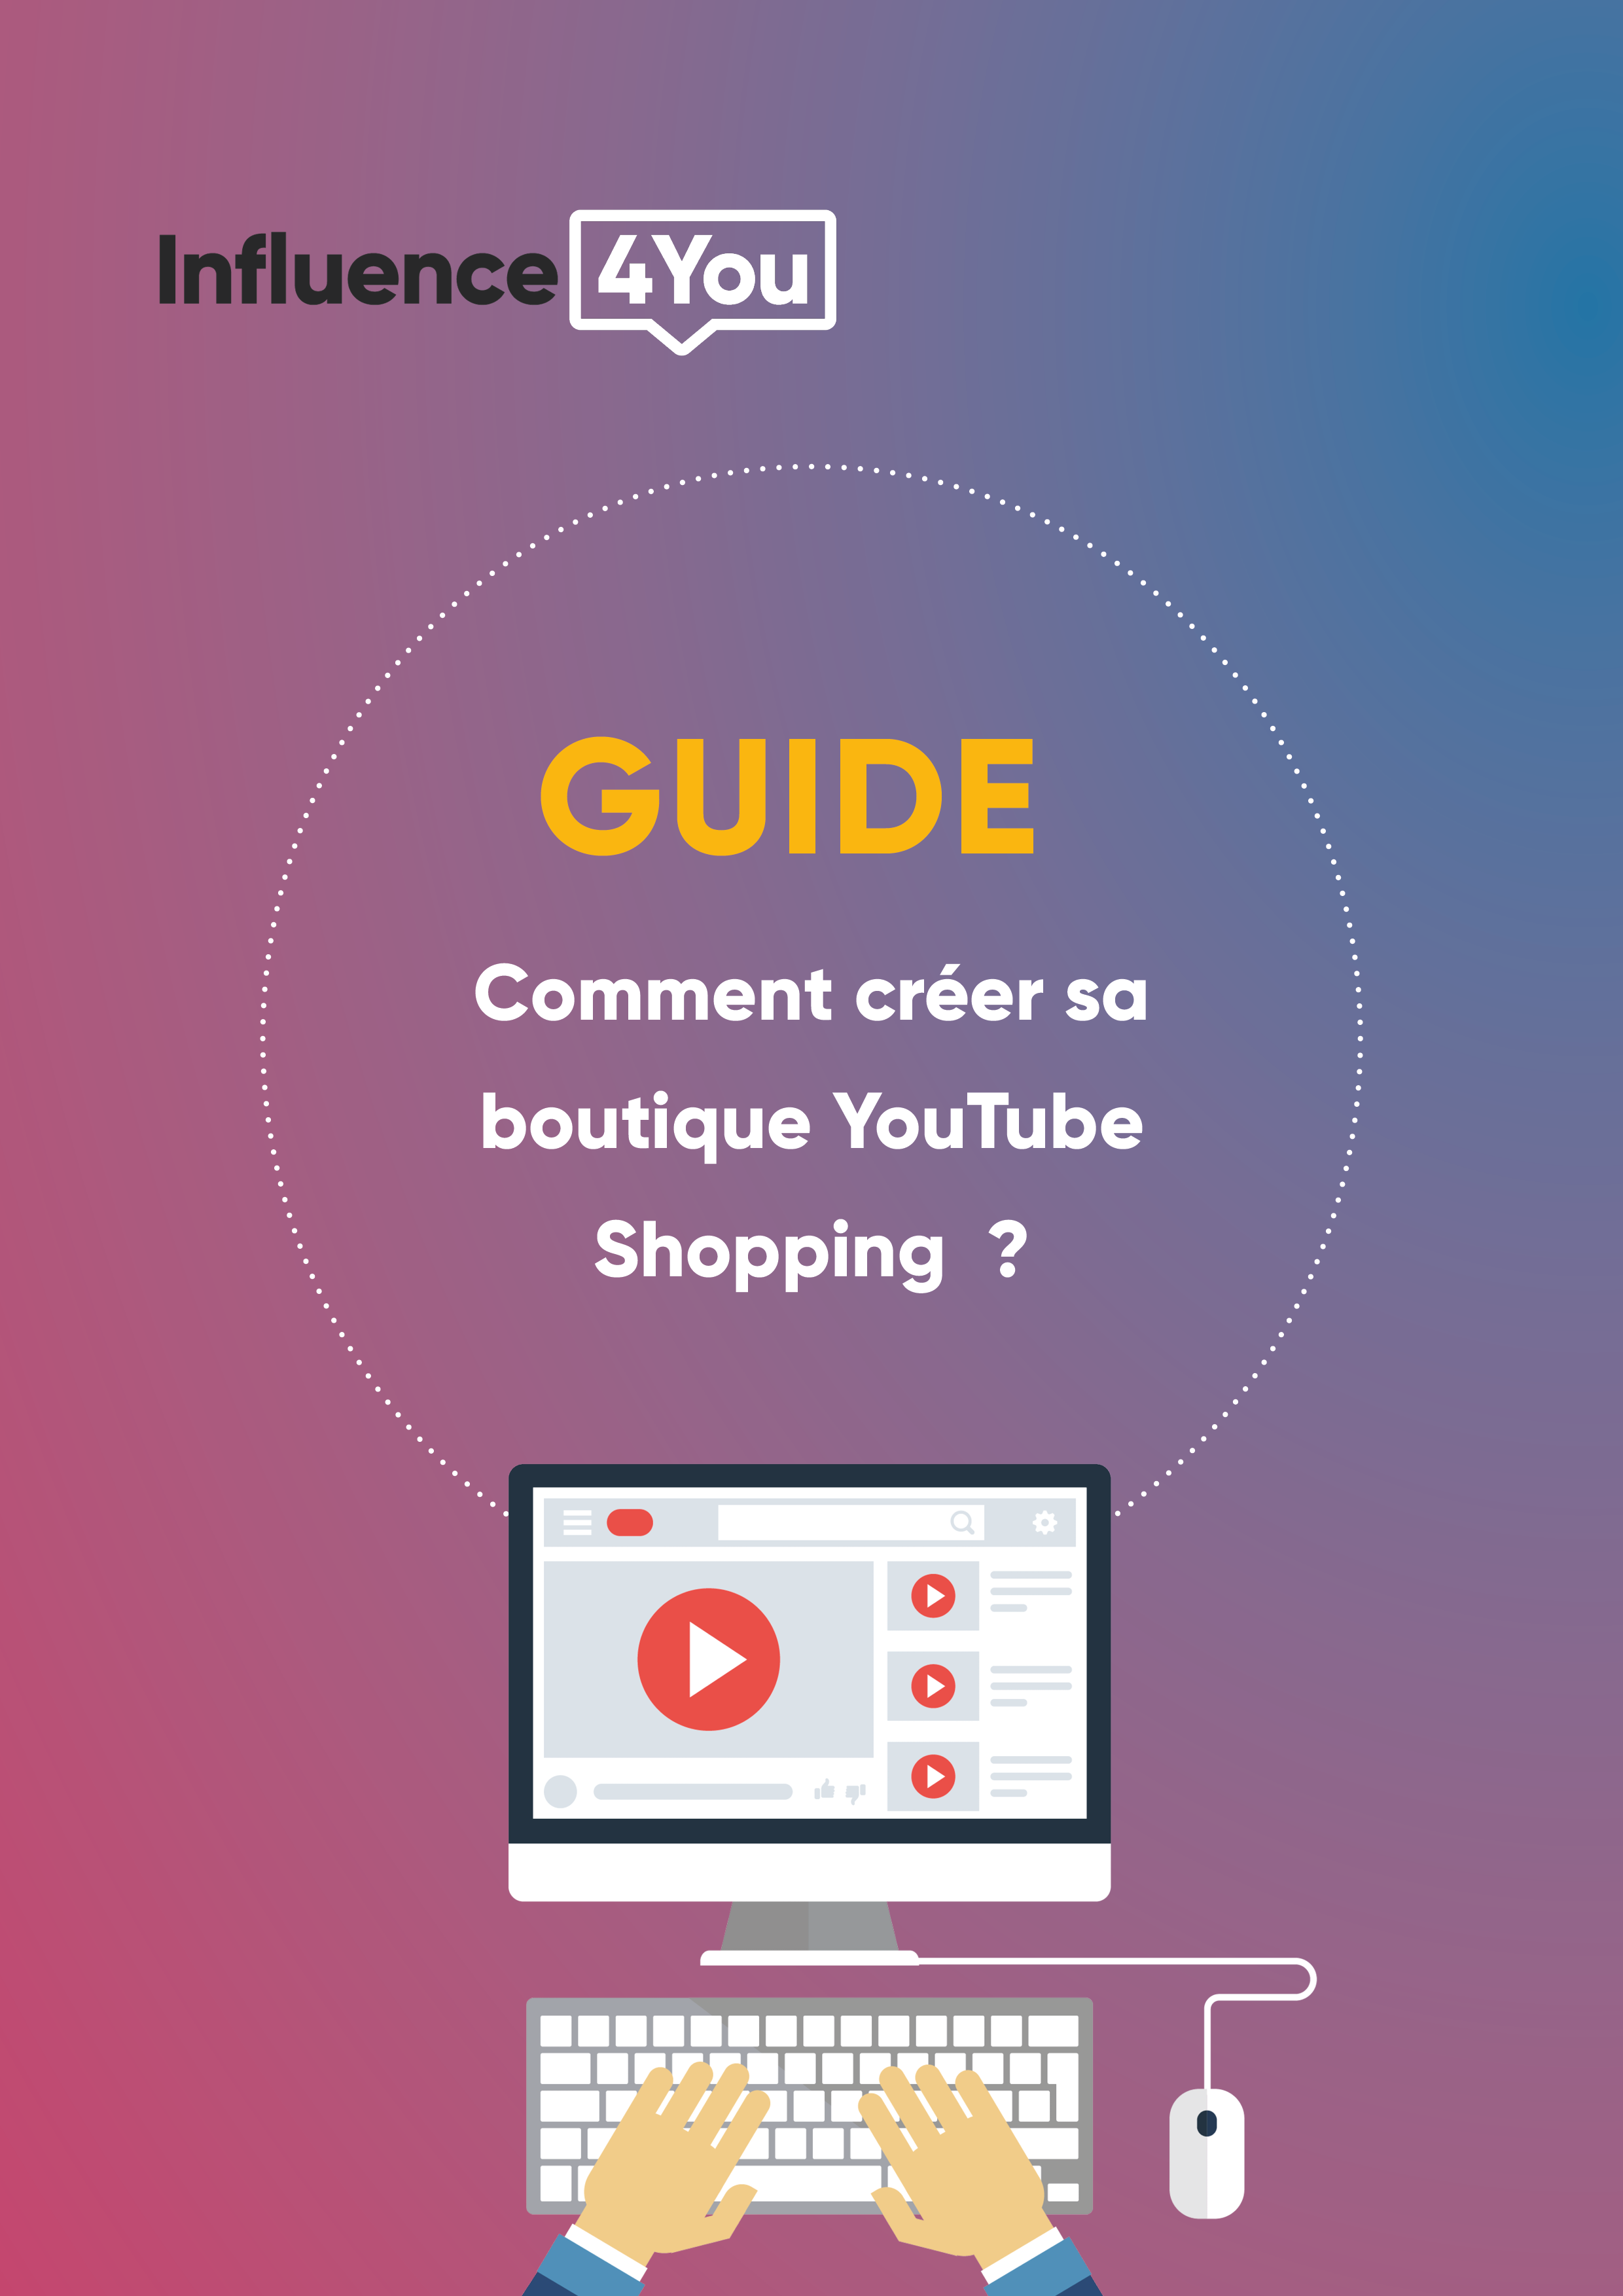 Guide - Comment créer sa boutique YouTube shopping